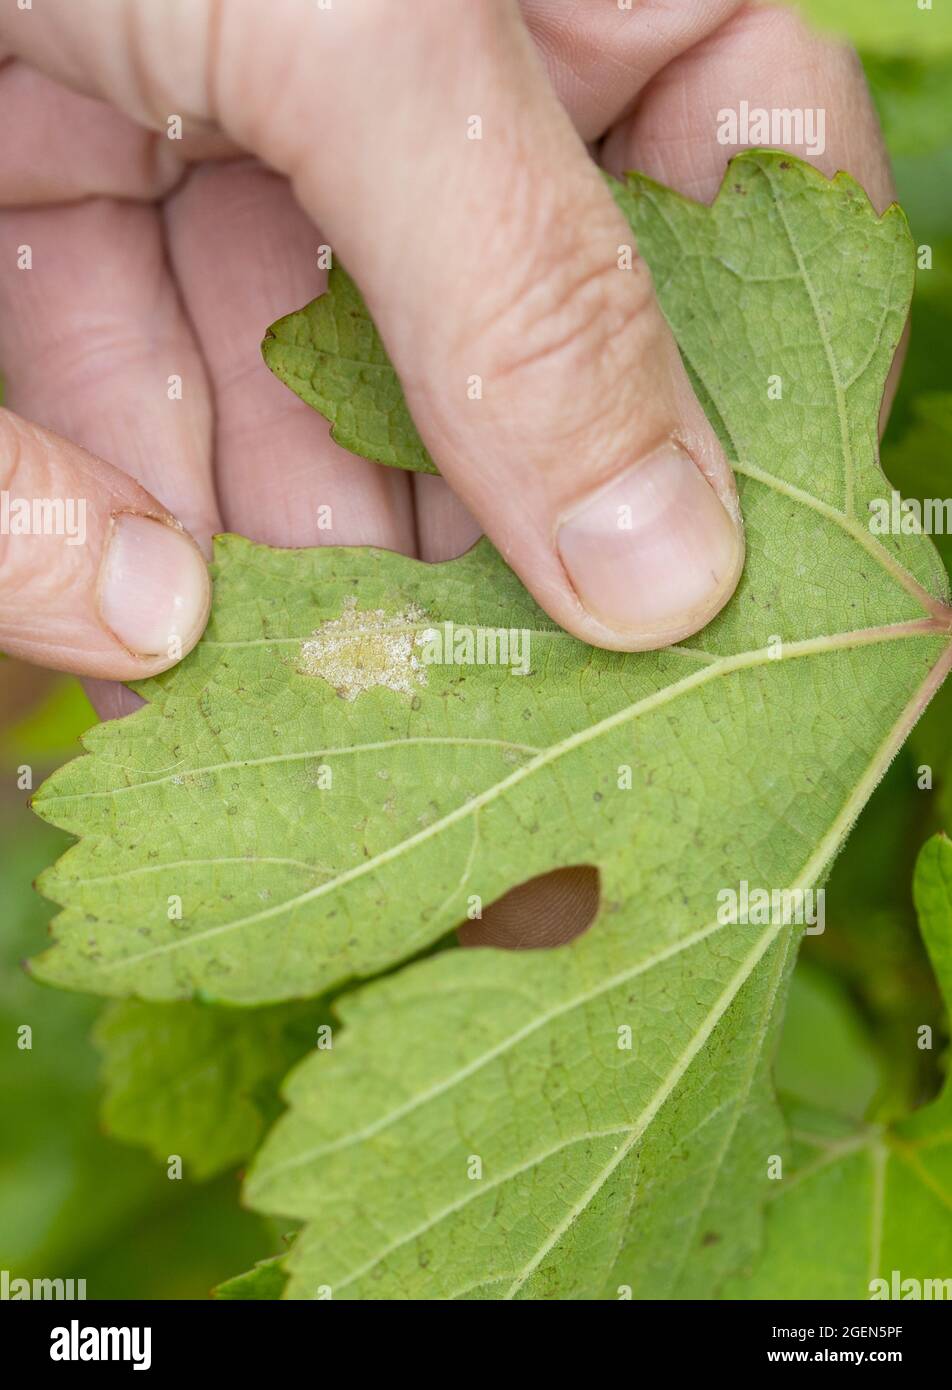 Randersacker, Germany. 19th Aug, 2021. Beate Leopold, managing director of Weinbauring Franken, shows the infestation of fungal spores of the so-called downy mildew (peronospora) on the leaf of a vine. The fungal disease is threatening the grapes in some vineyards in Franconia. After the many rains in spring and summer, the fungus is a widespread problem throughout Germany, but also in other European countries. Credit: Daniel Karmann/dpa/Alamy Live News Stock Photo